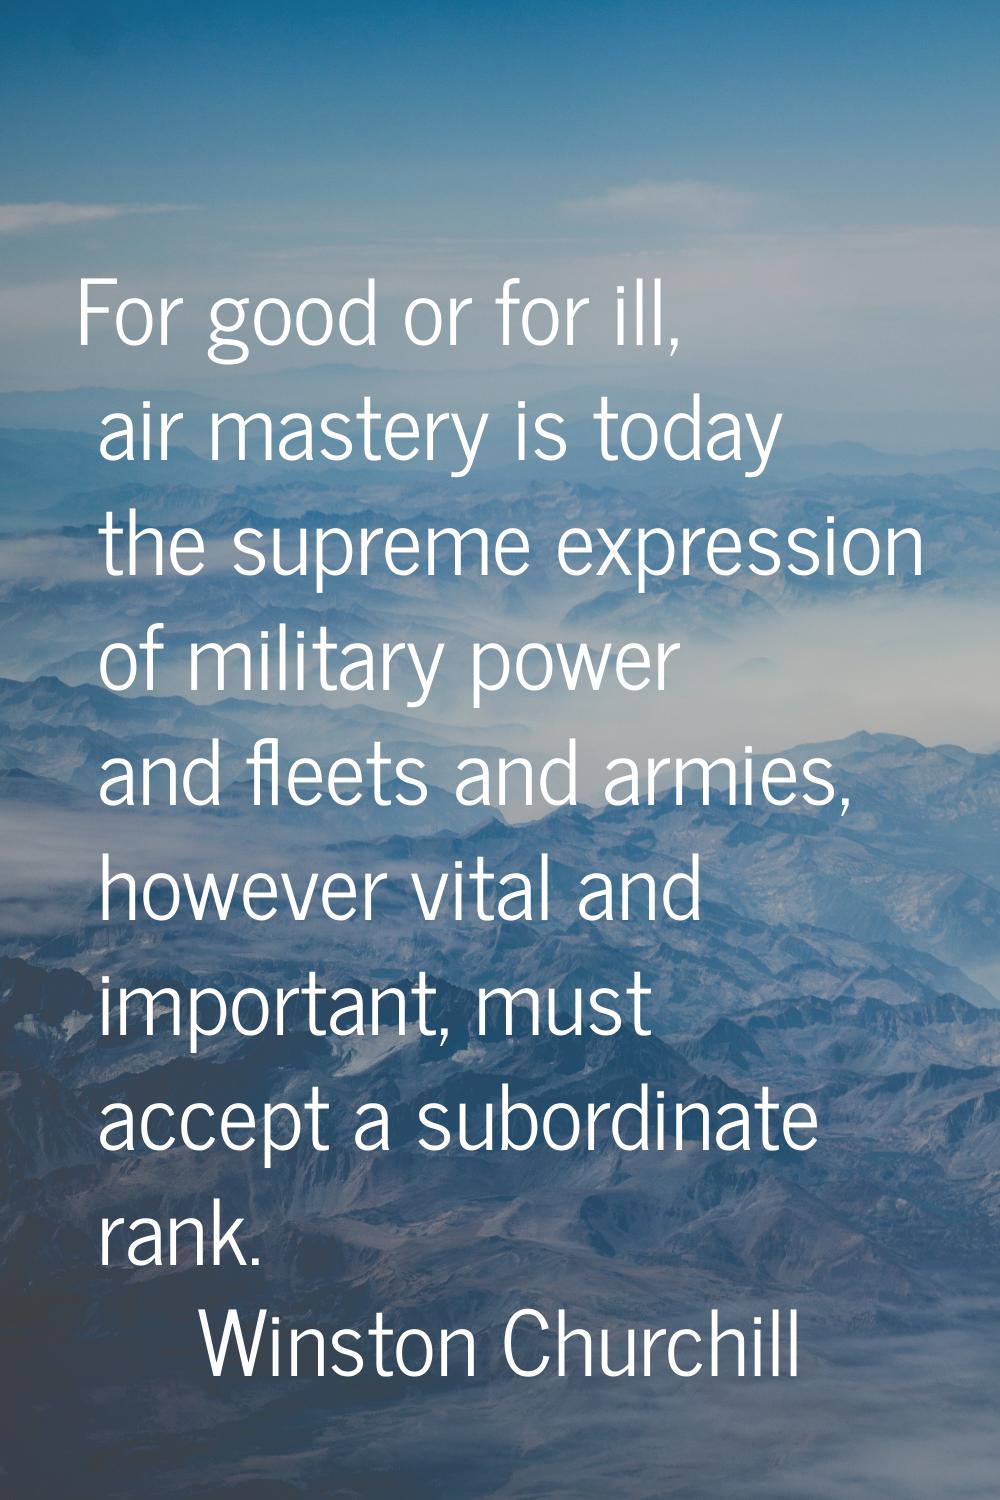 For good or for ill, air mastery is today the supreme expression of military power and fleets and a